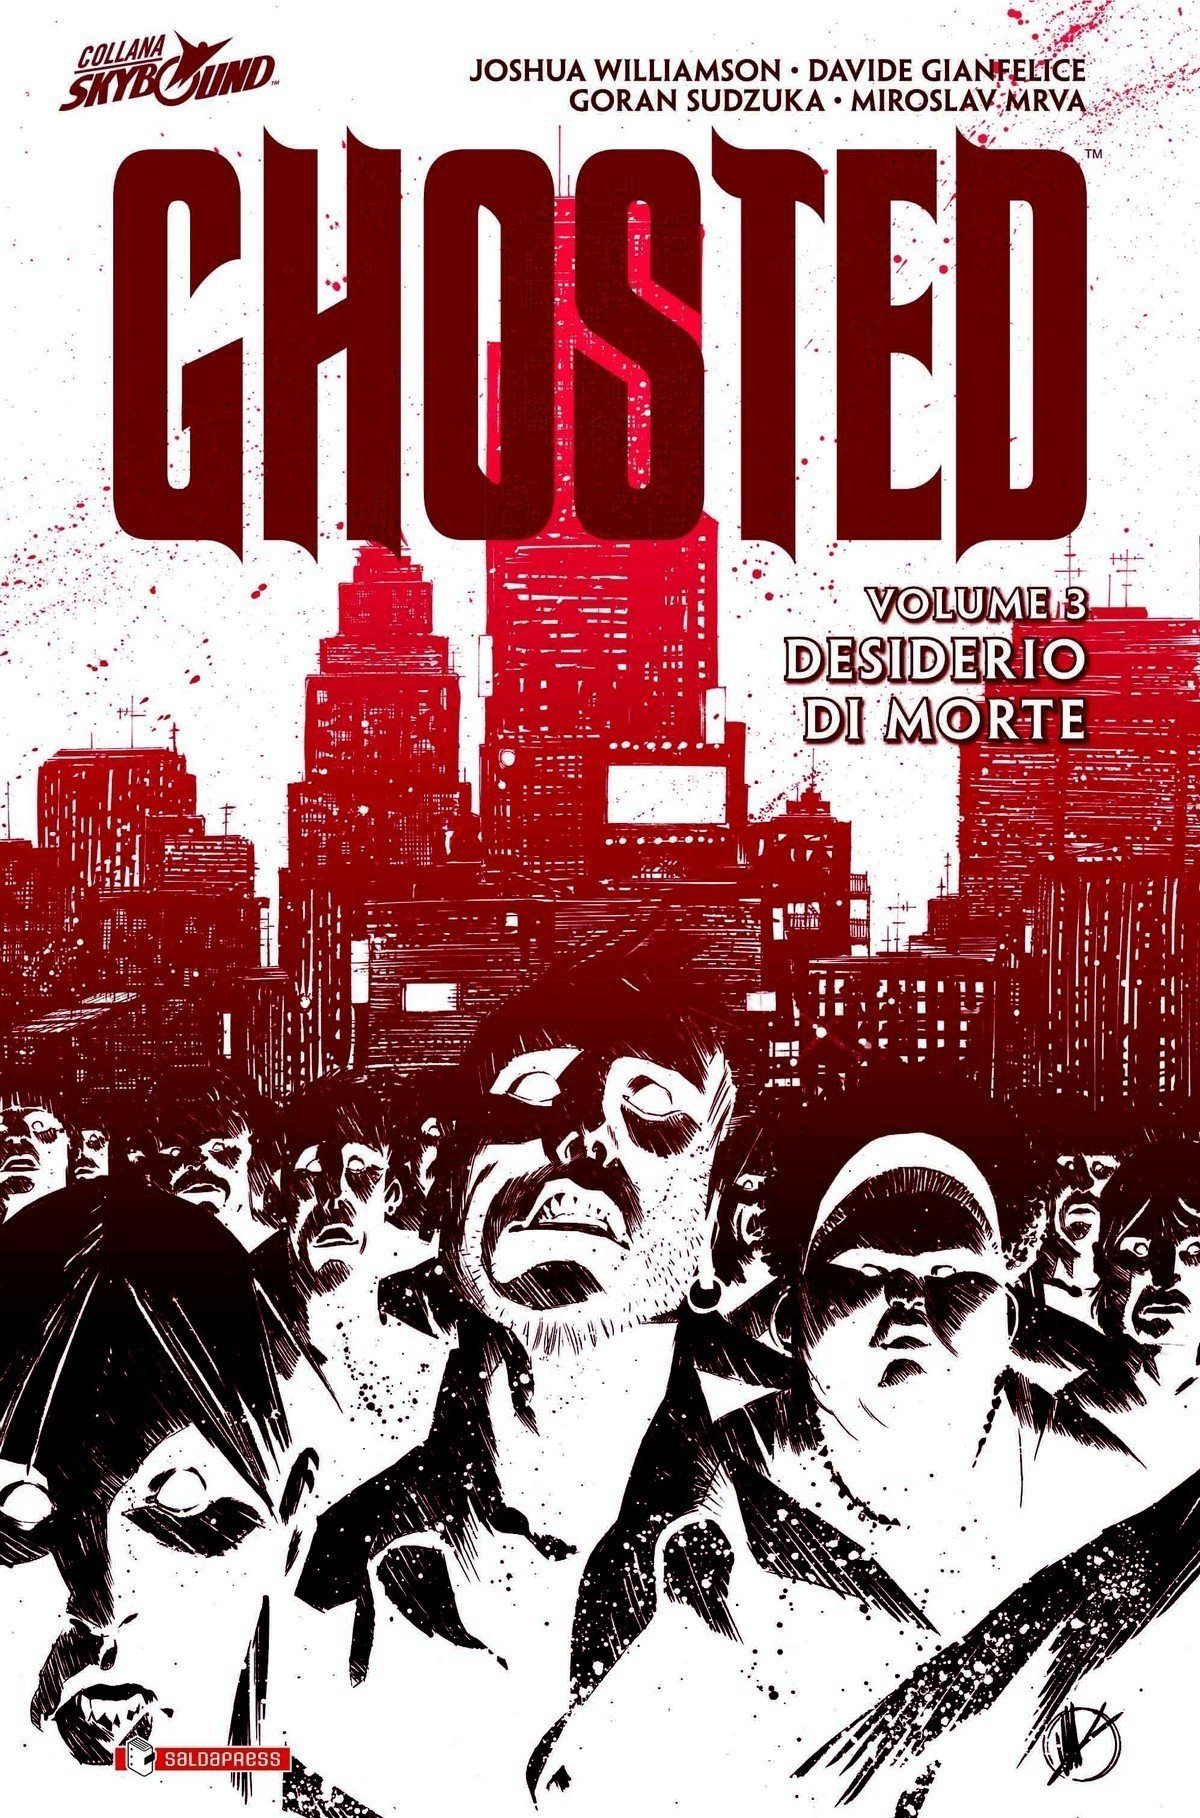 Ghosted_Vol3_cover_HiRes